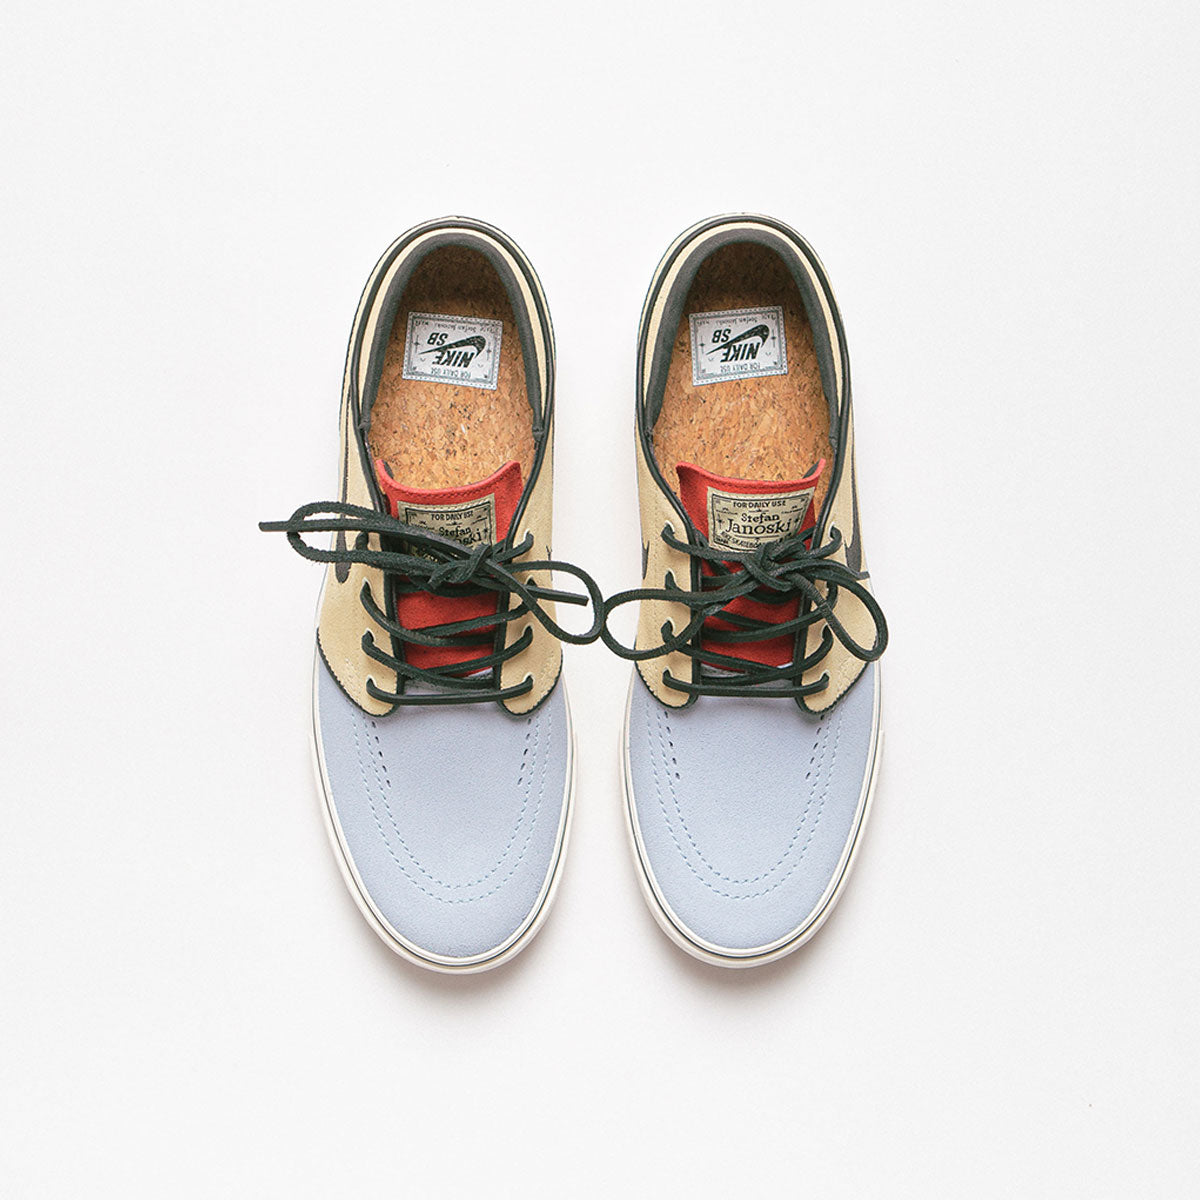 Nike SB Janoski OG+ Shoes in Alabaster and Chile Red